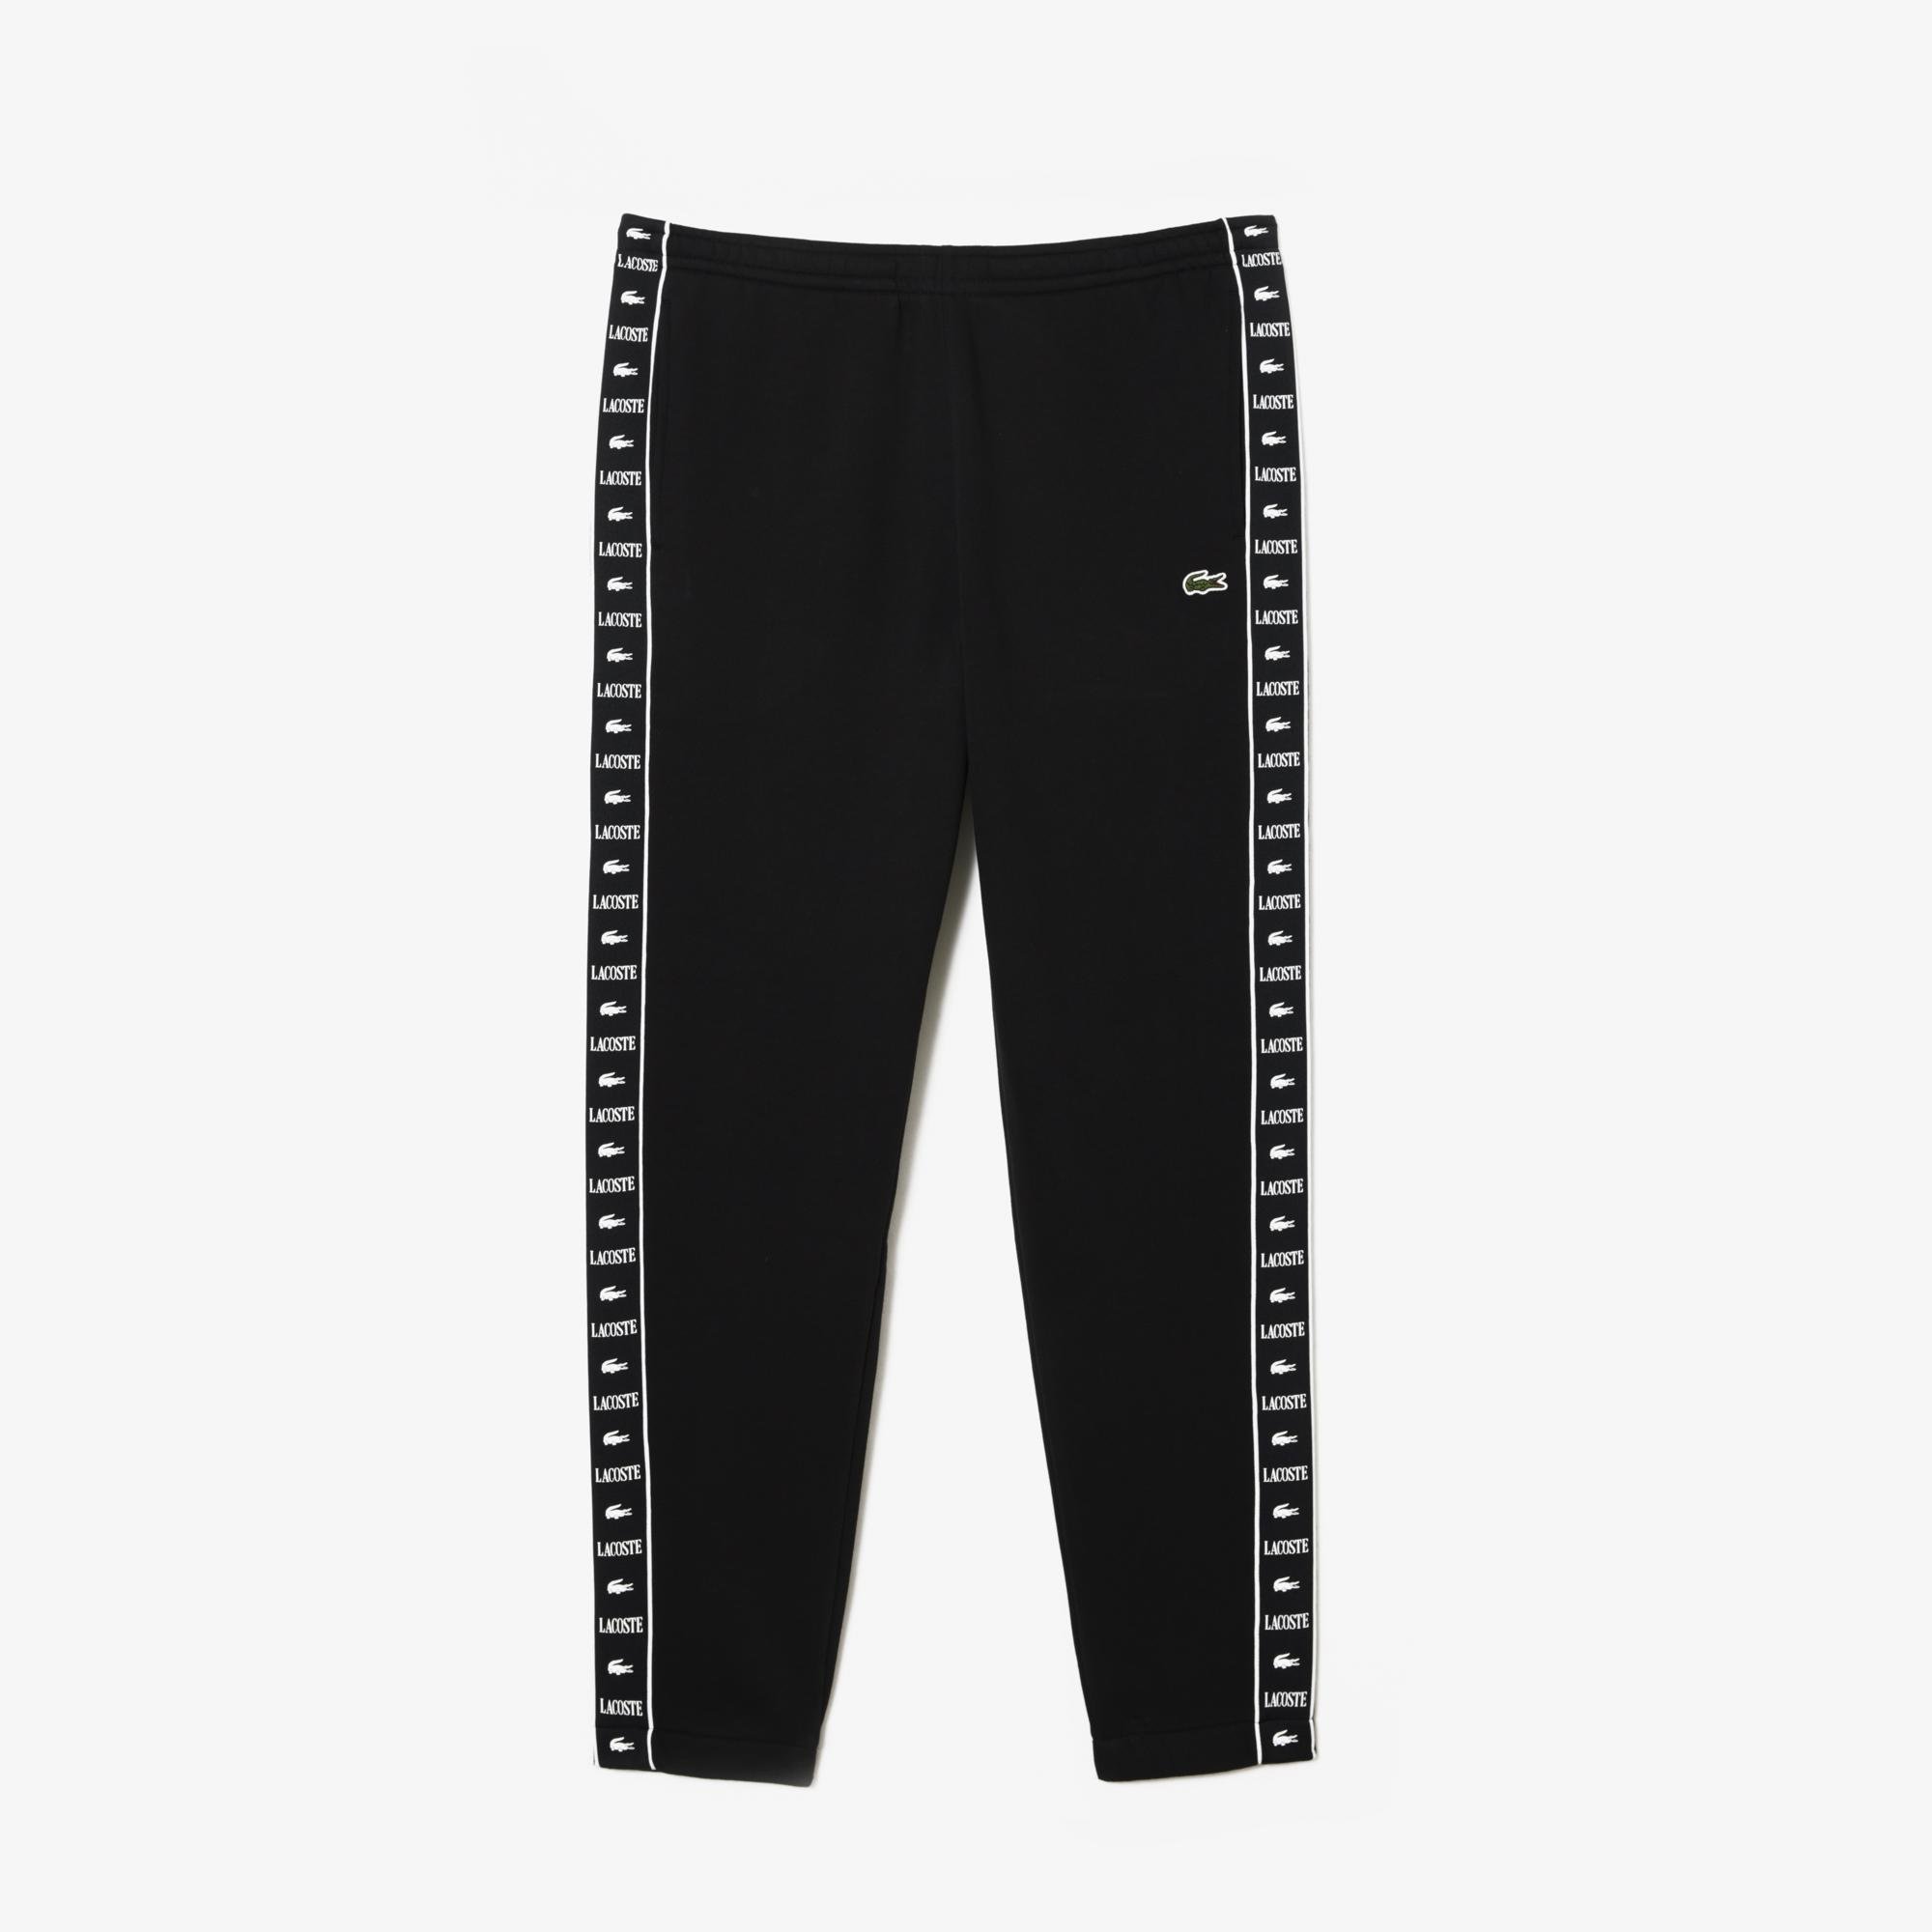 Lacoste men's tapered sweatpants with print in black